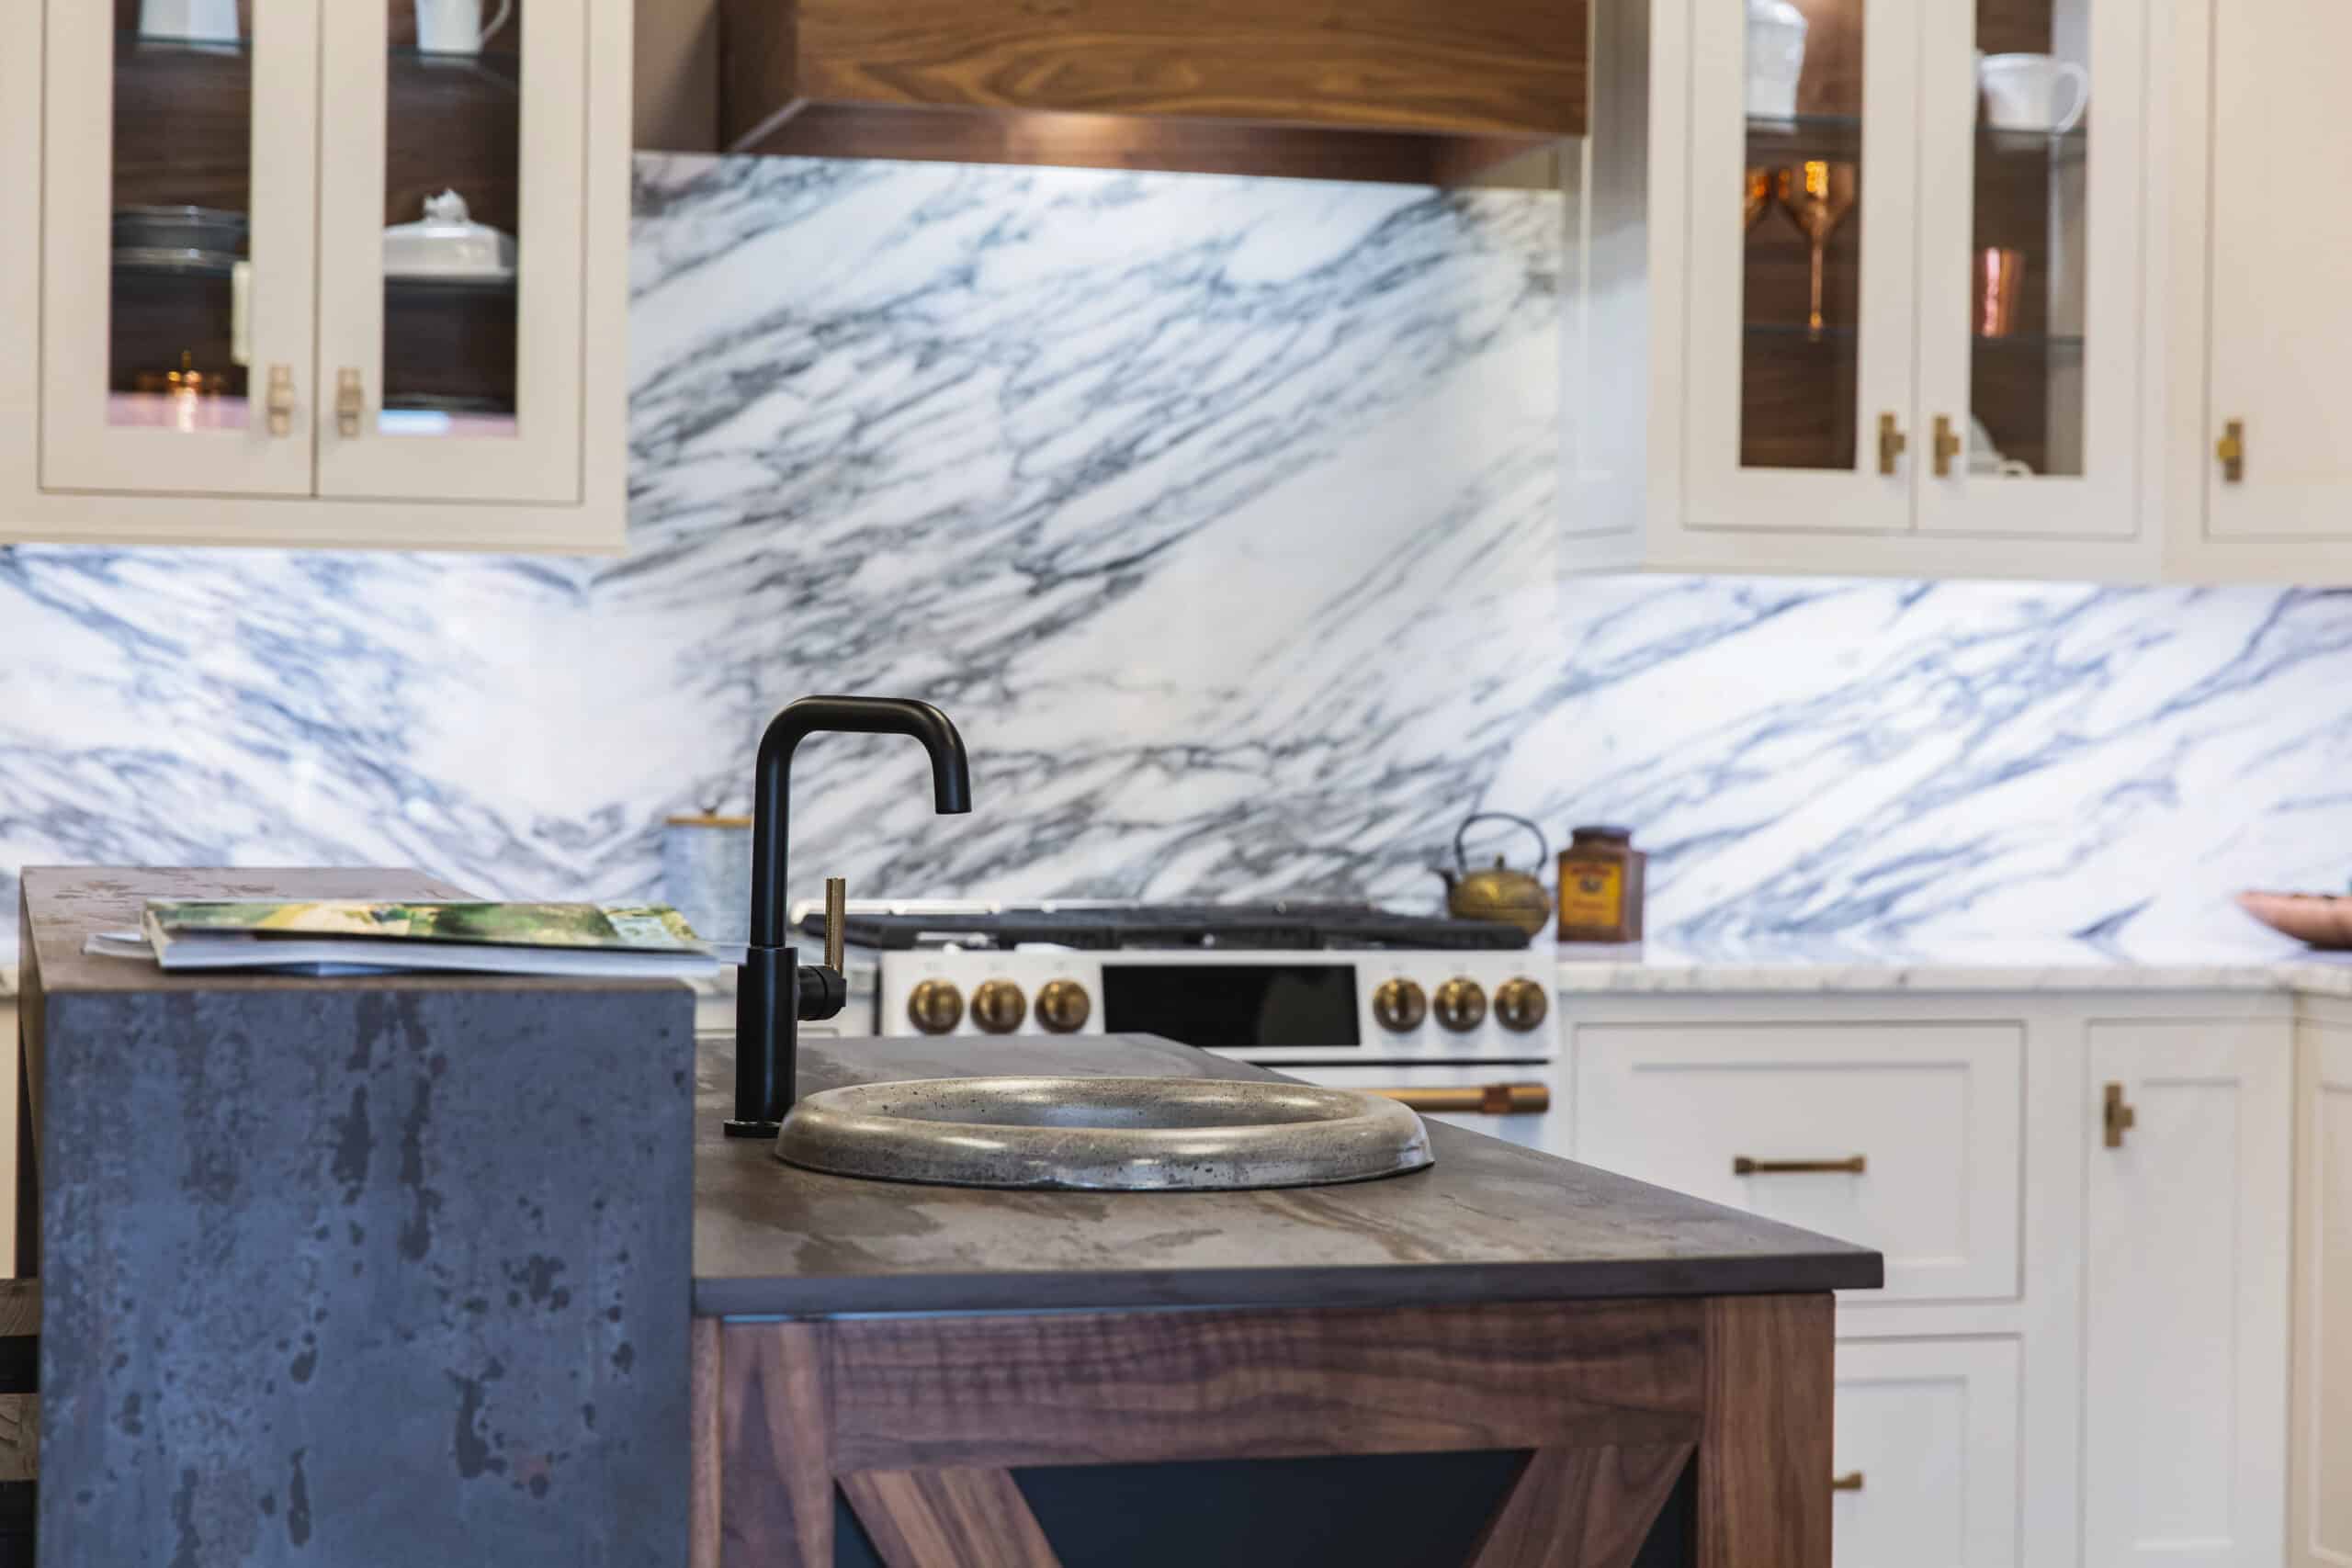 A modern kitchen with sleek marble countertops and a stylish black sink